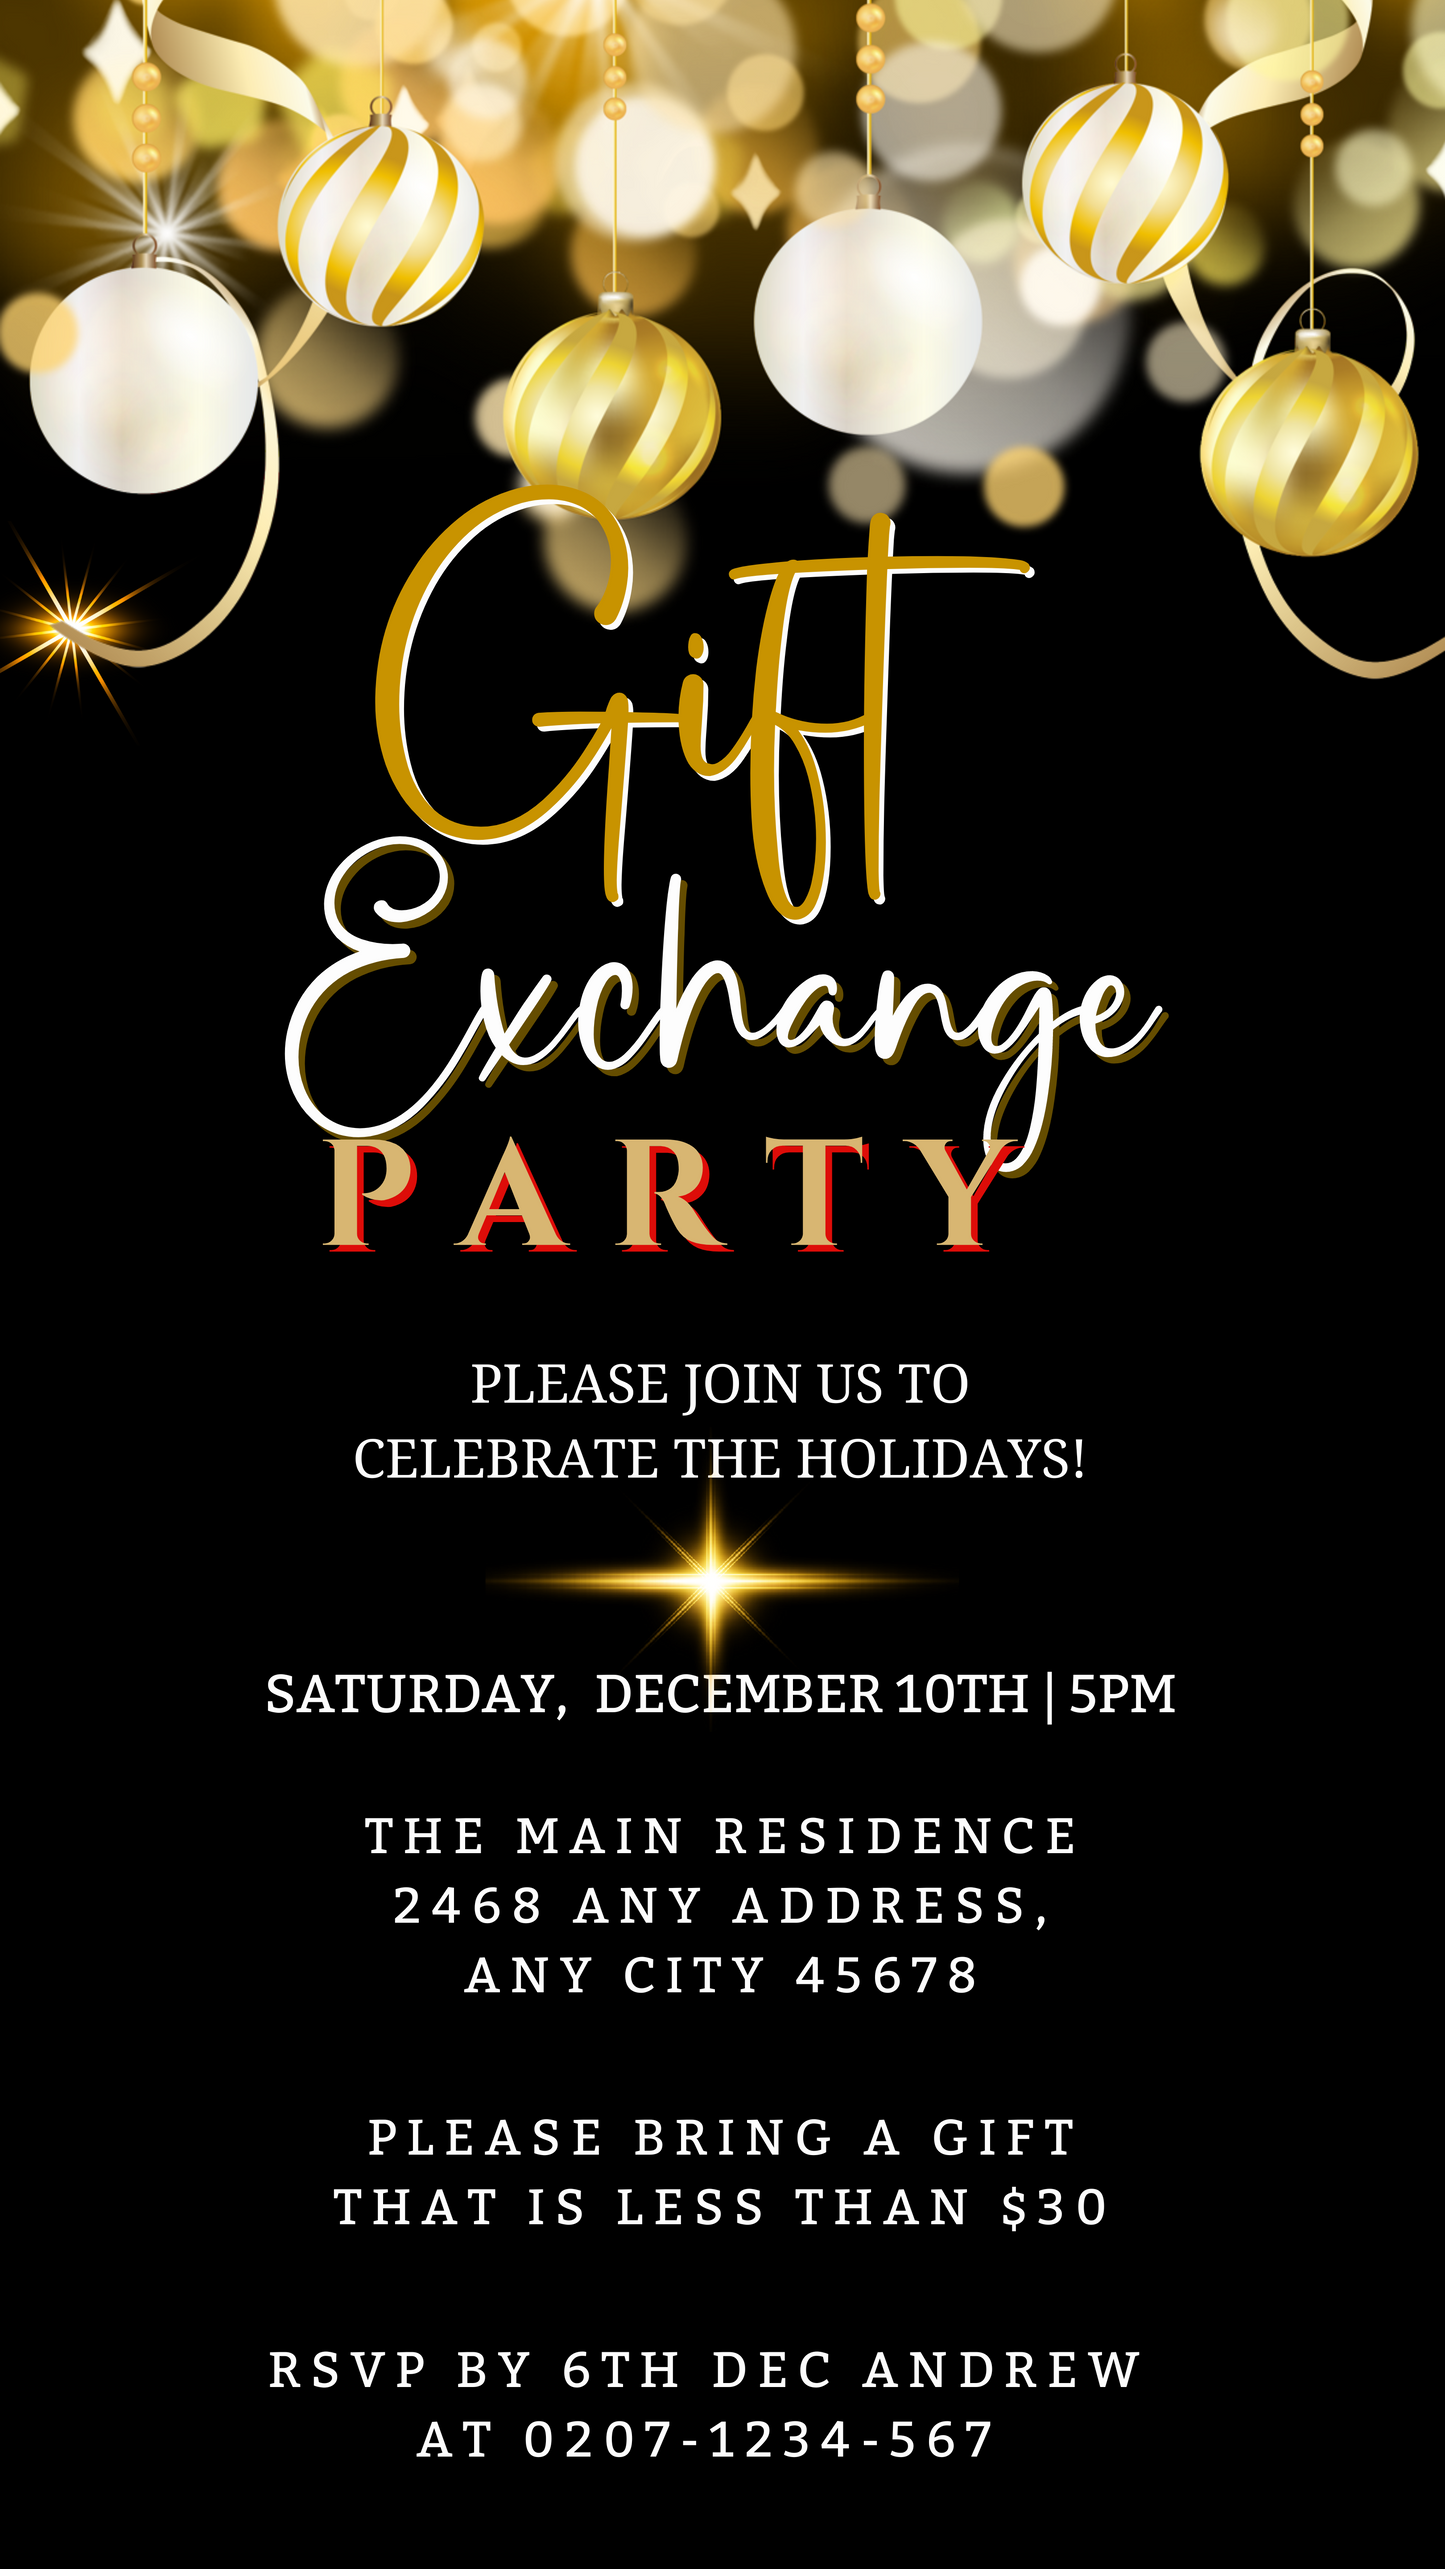 Black Gold White Ornaments Gift Exchange | Christmas Party Evite featuring elegant gold-striped ornaments and customizable event details for digital sharing.